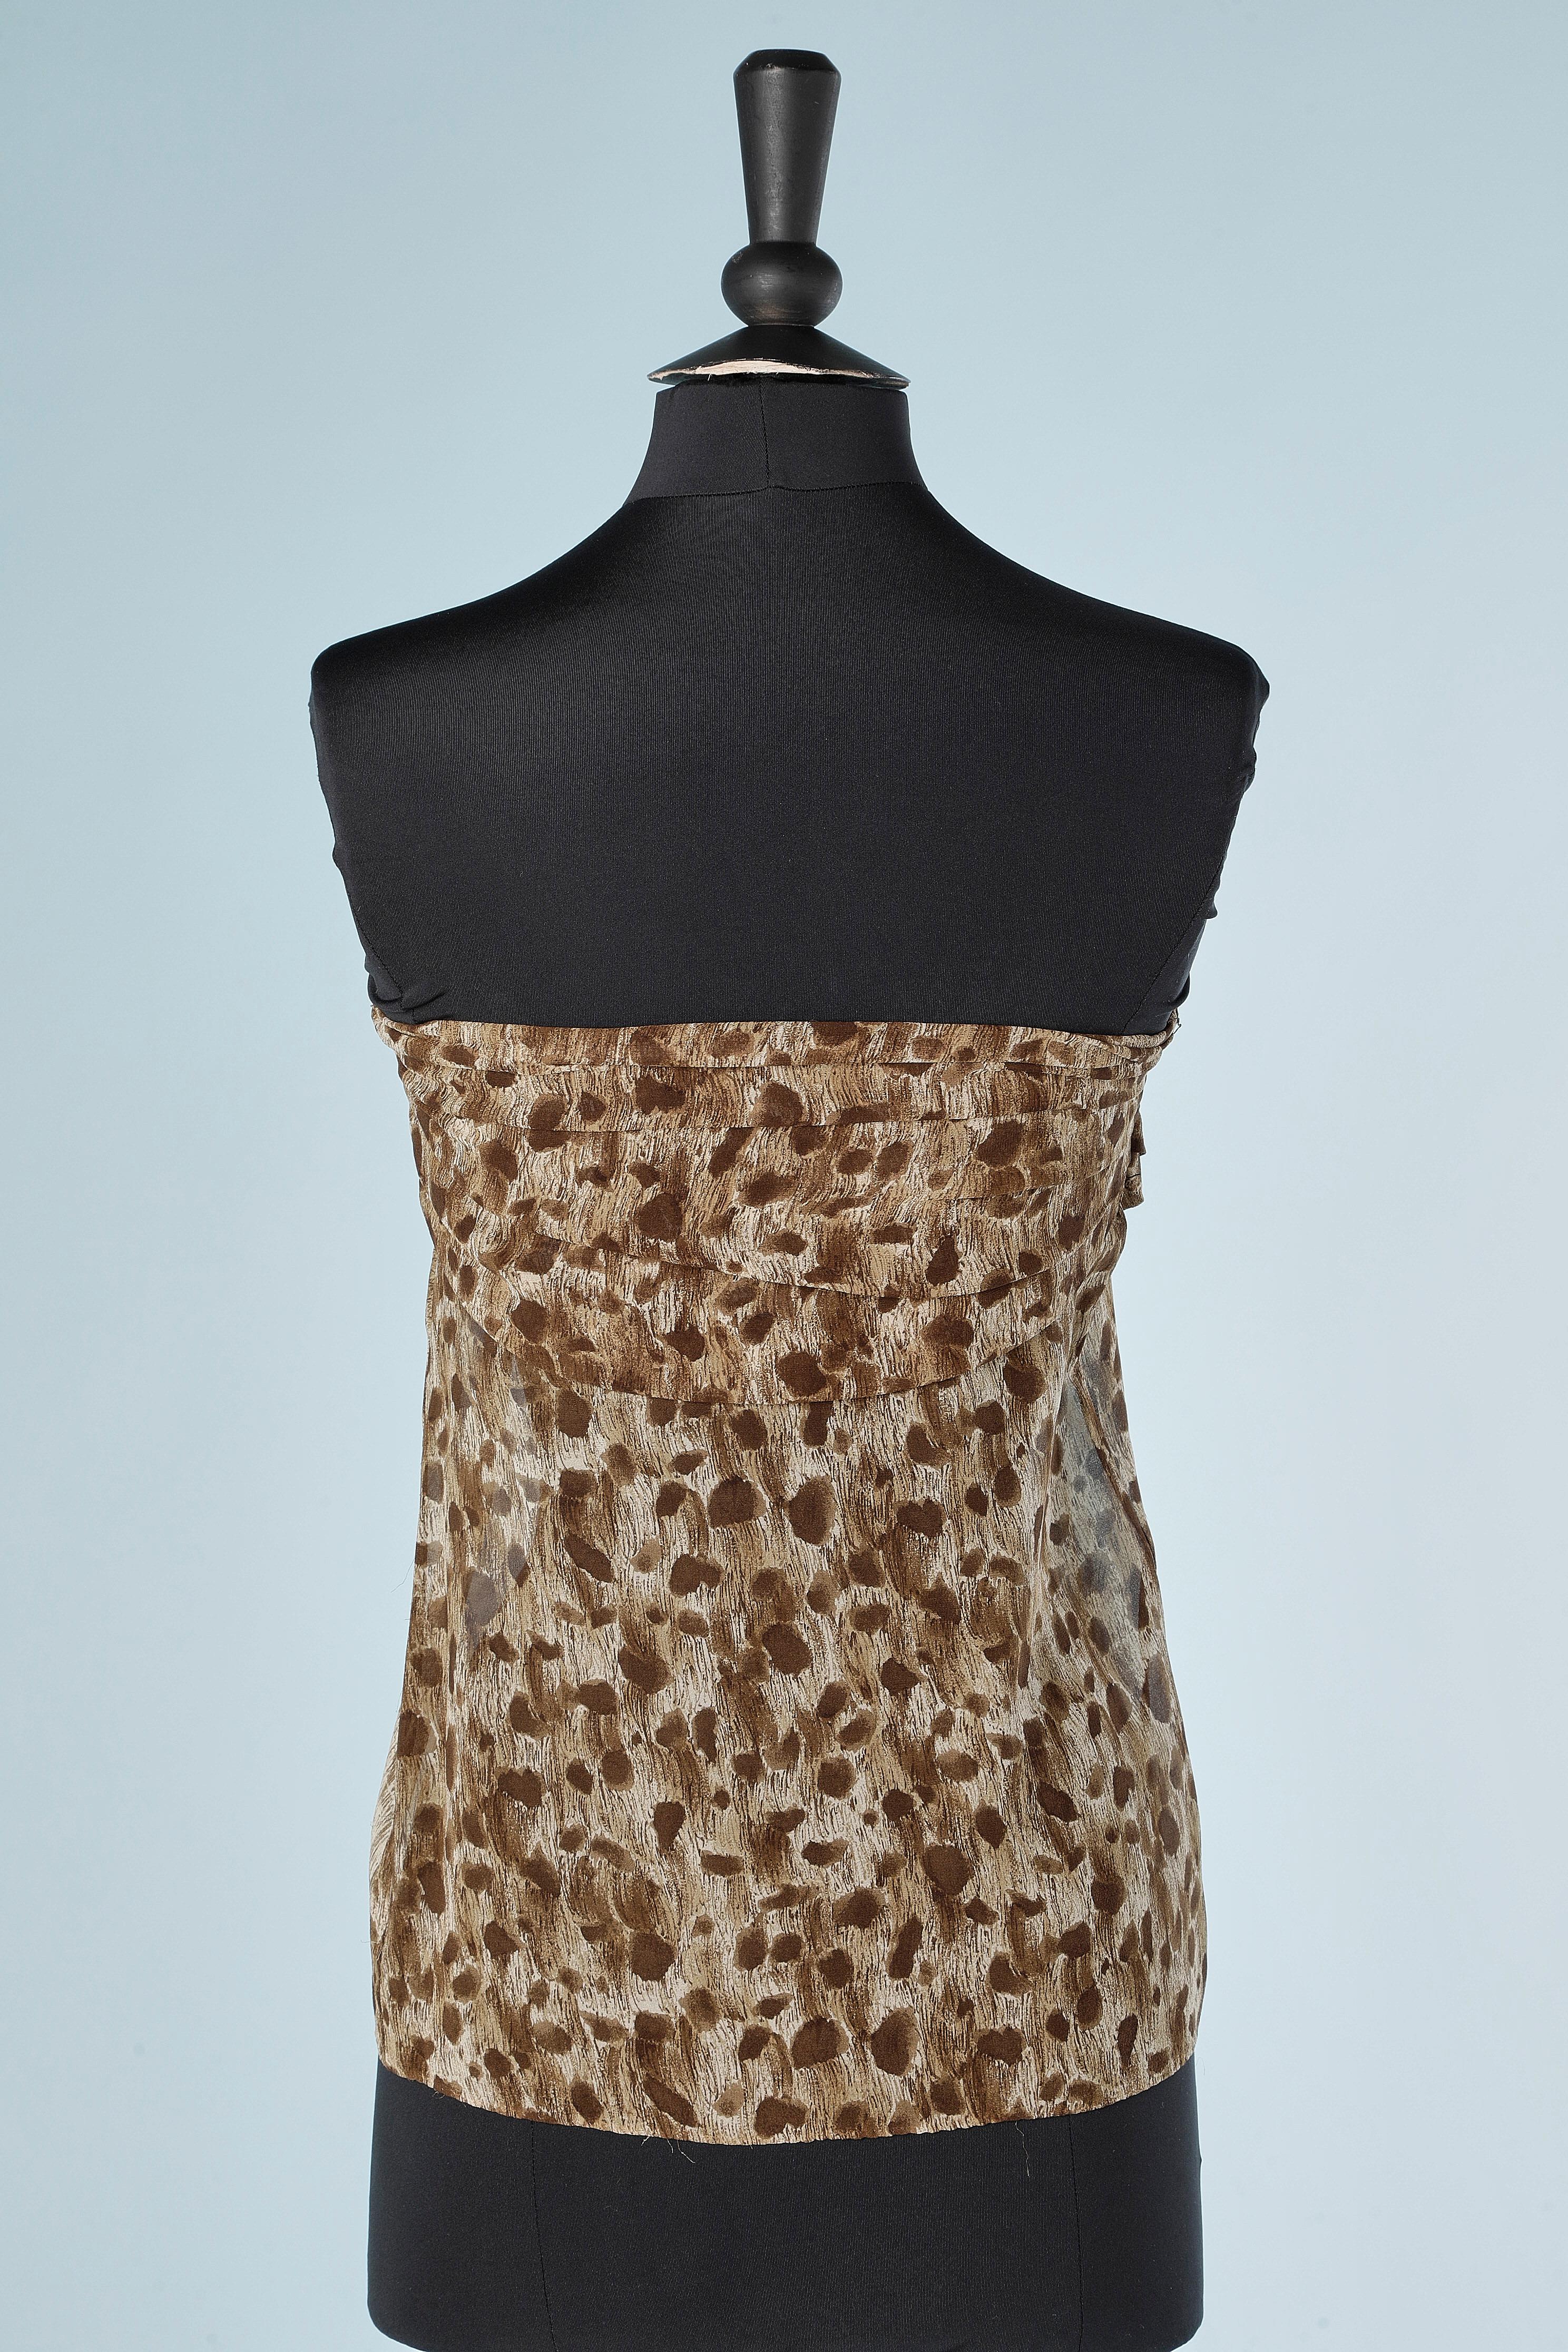 Leopard print shirt and bustier in silk chiffon  Complice by Gianni Versace  For Sale 1